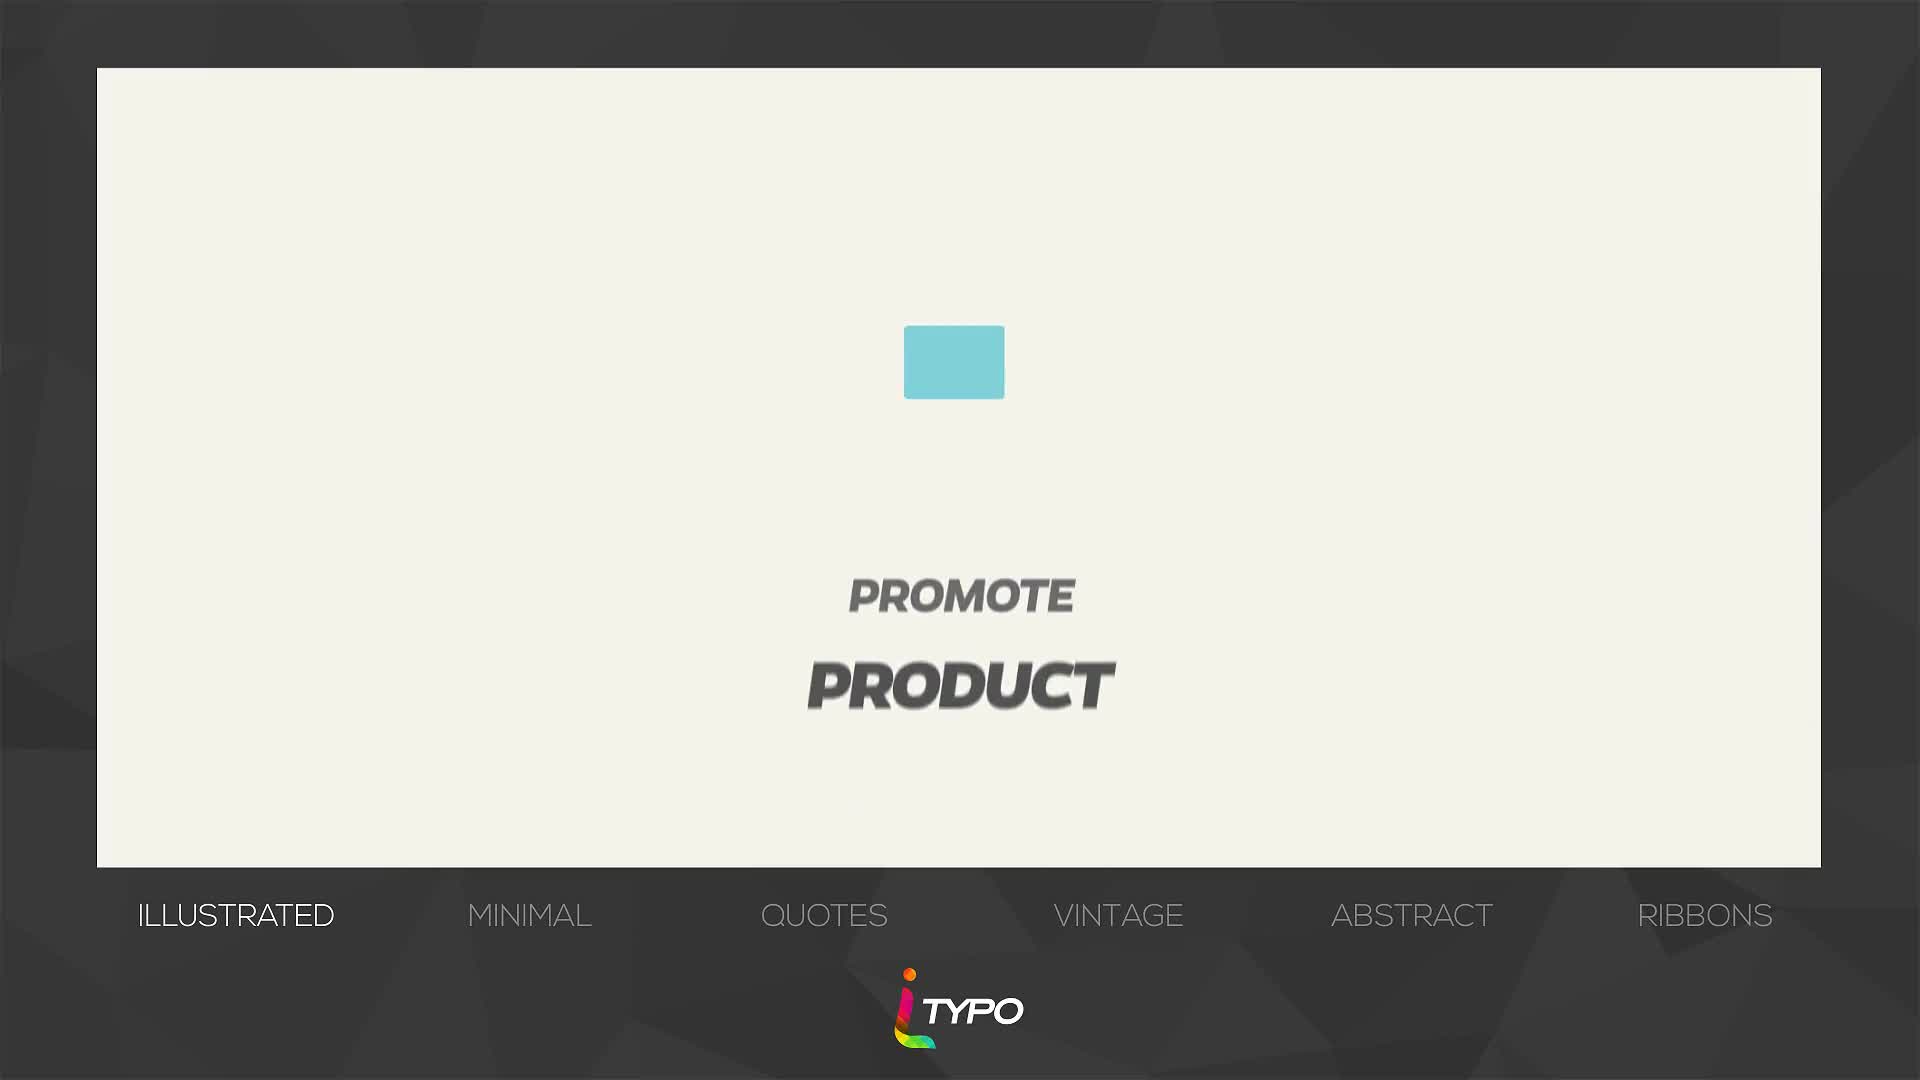 iTypo | Typography & Title Animations - Download Videohive 16143759